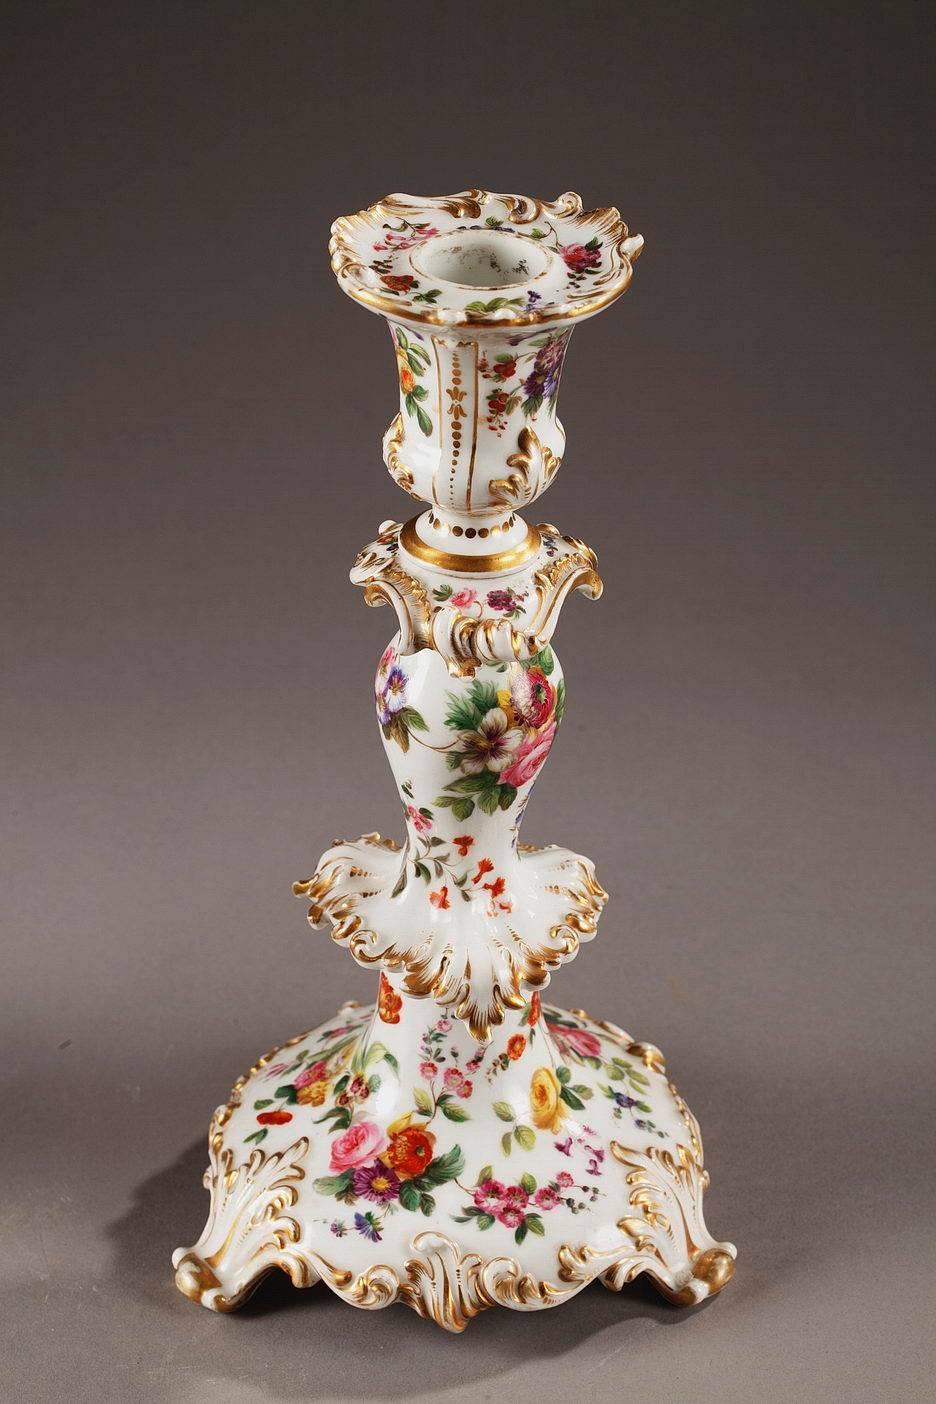 French Mid-19th Century Pair of Porcelain Candlesticks by Jacob Petit